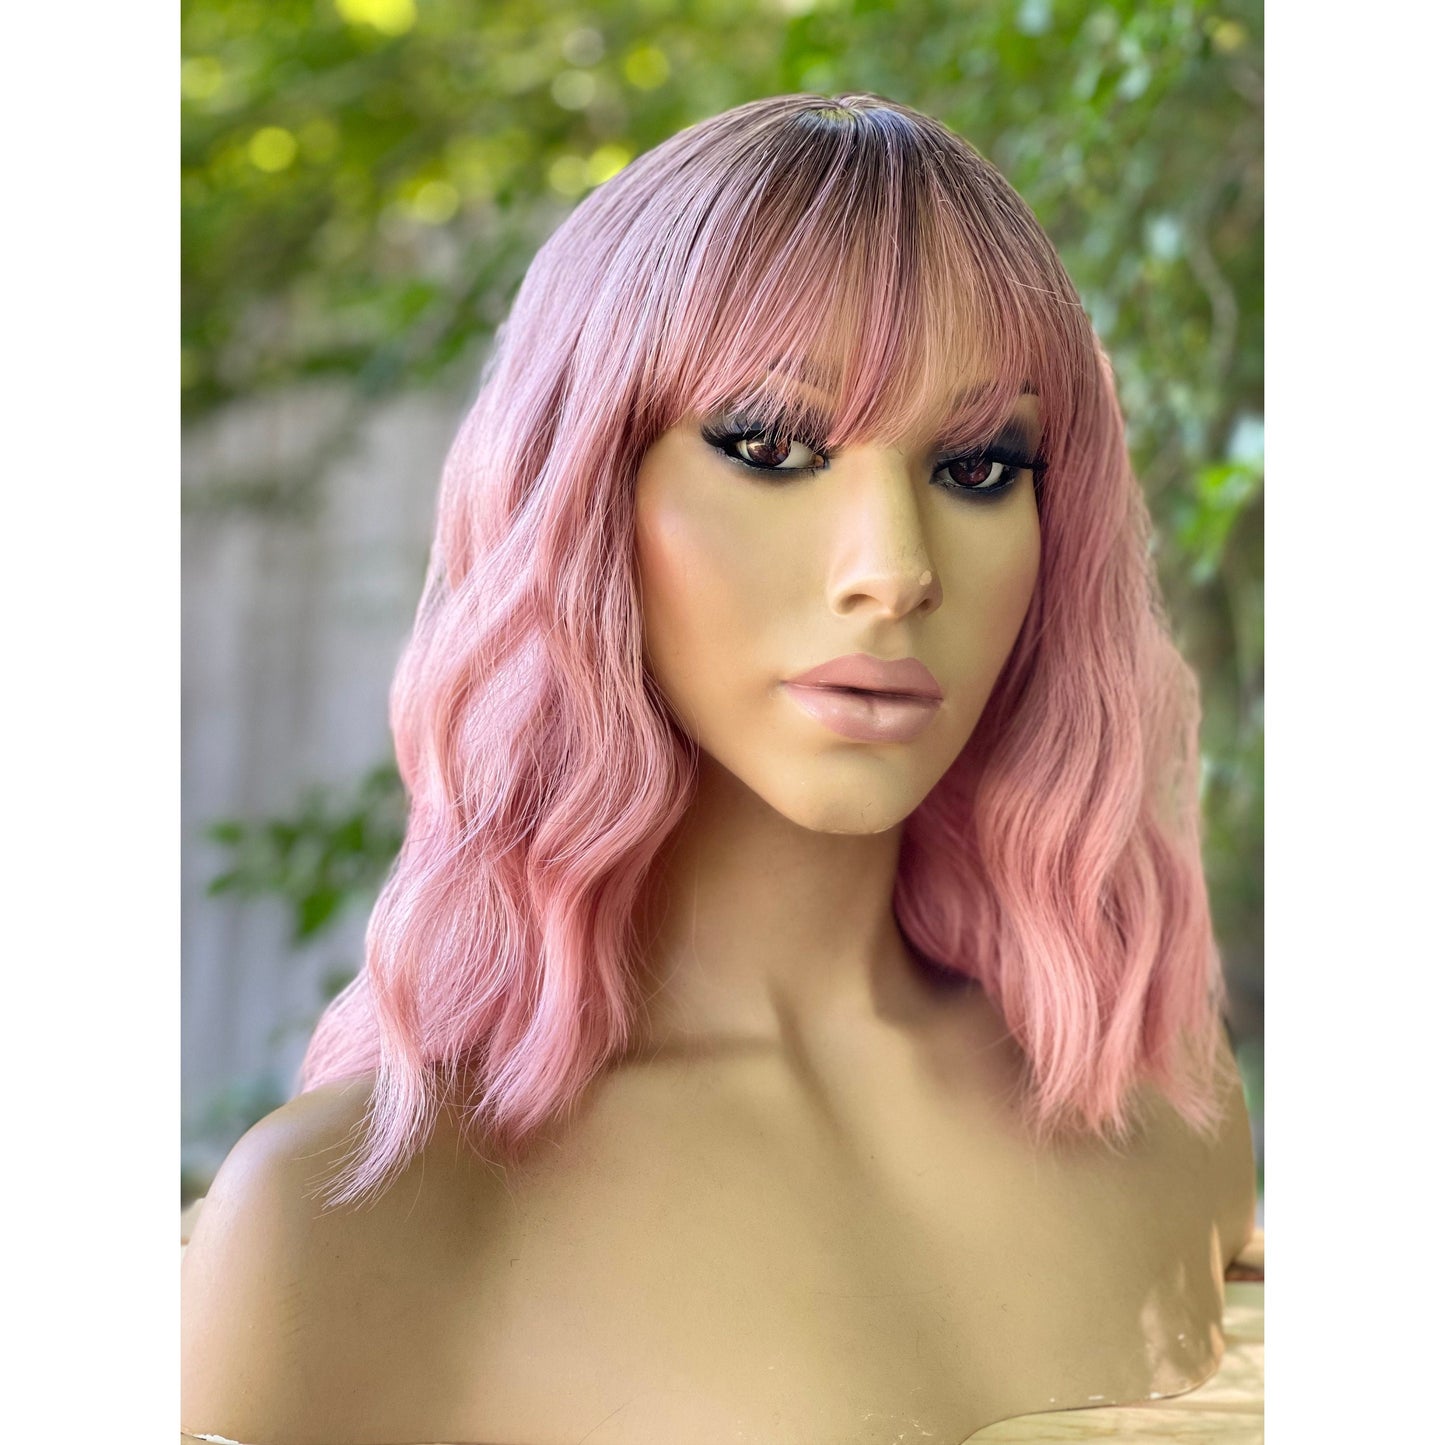 Short pink wavy wig with ombré fringe choppy bangs Human Hair Blend Wig